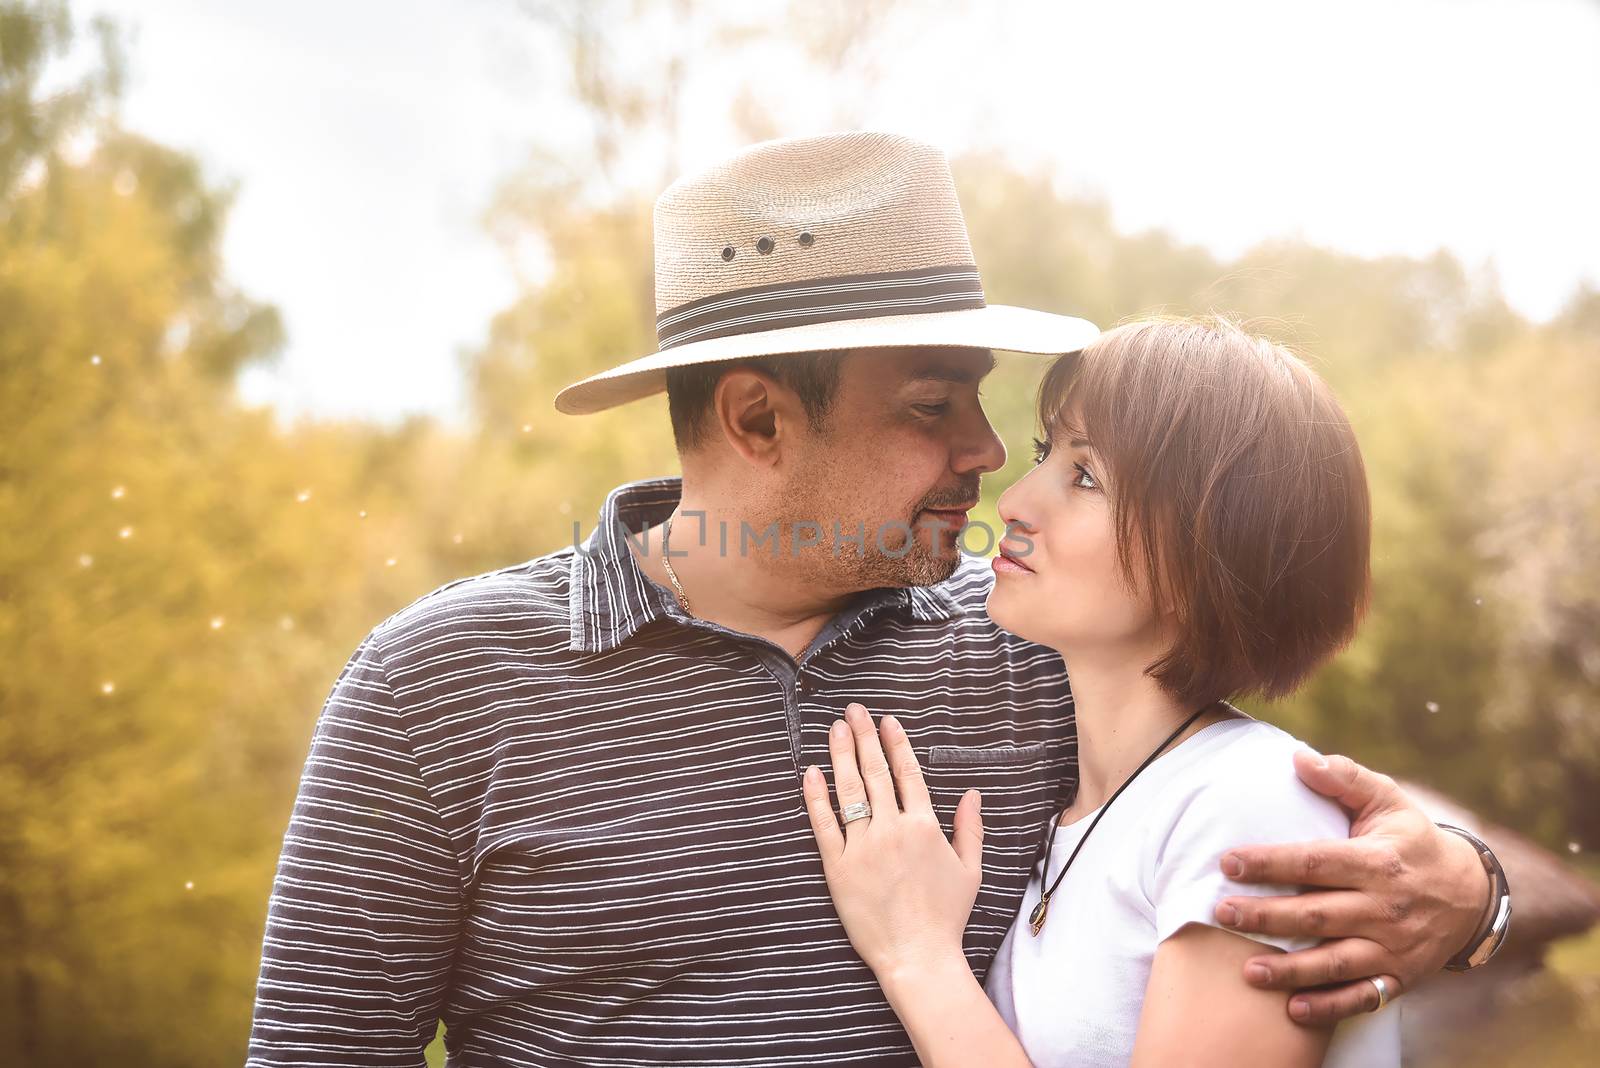 photo portrait of a happy middle-aged couple in nature by Nickstock